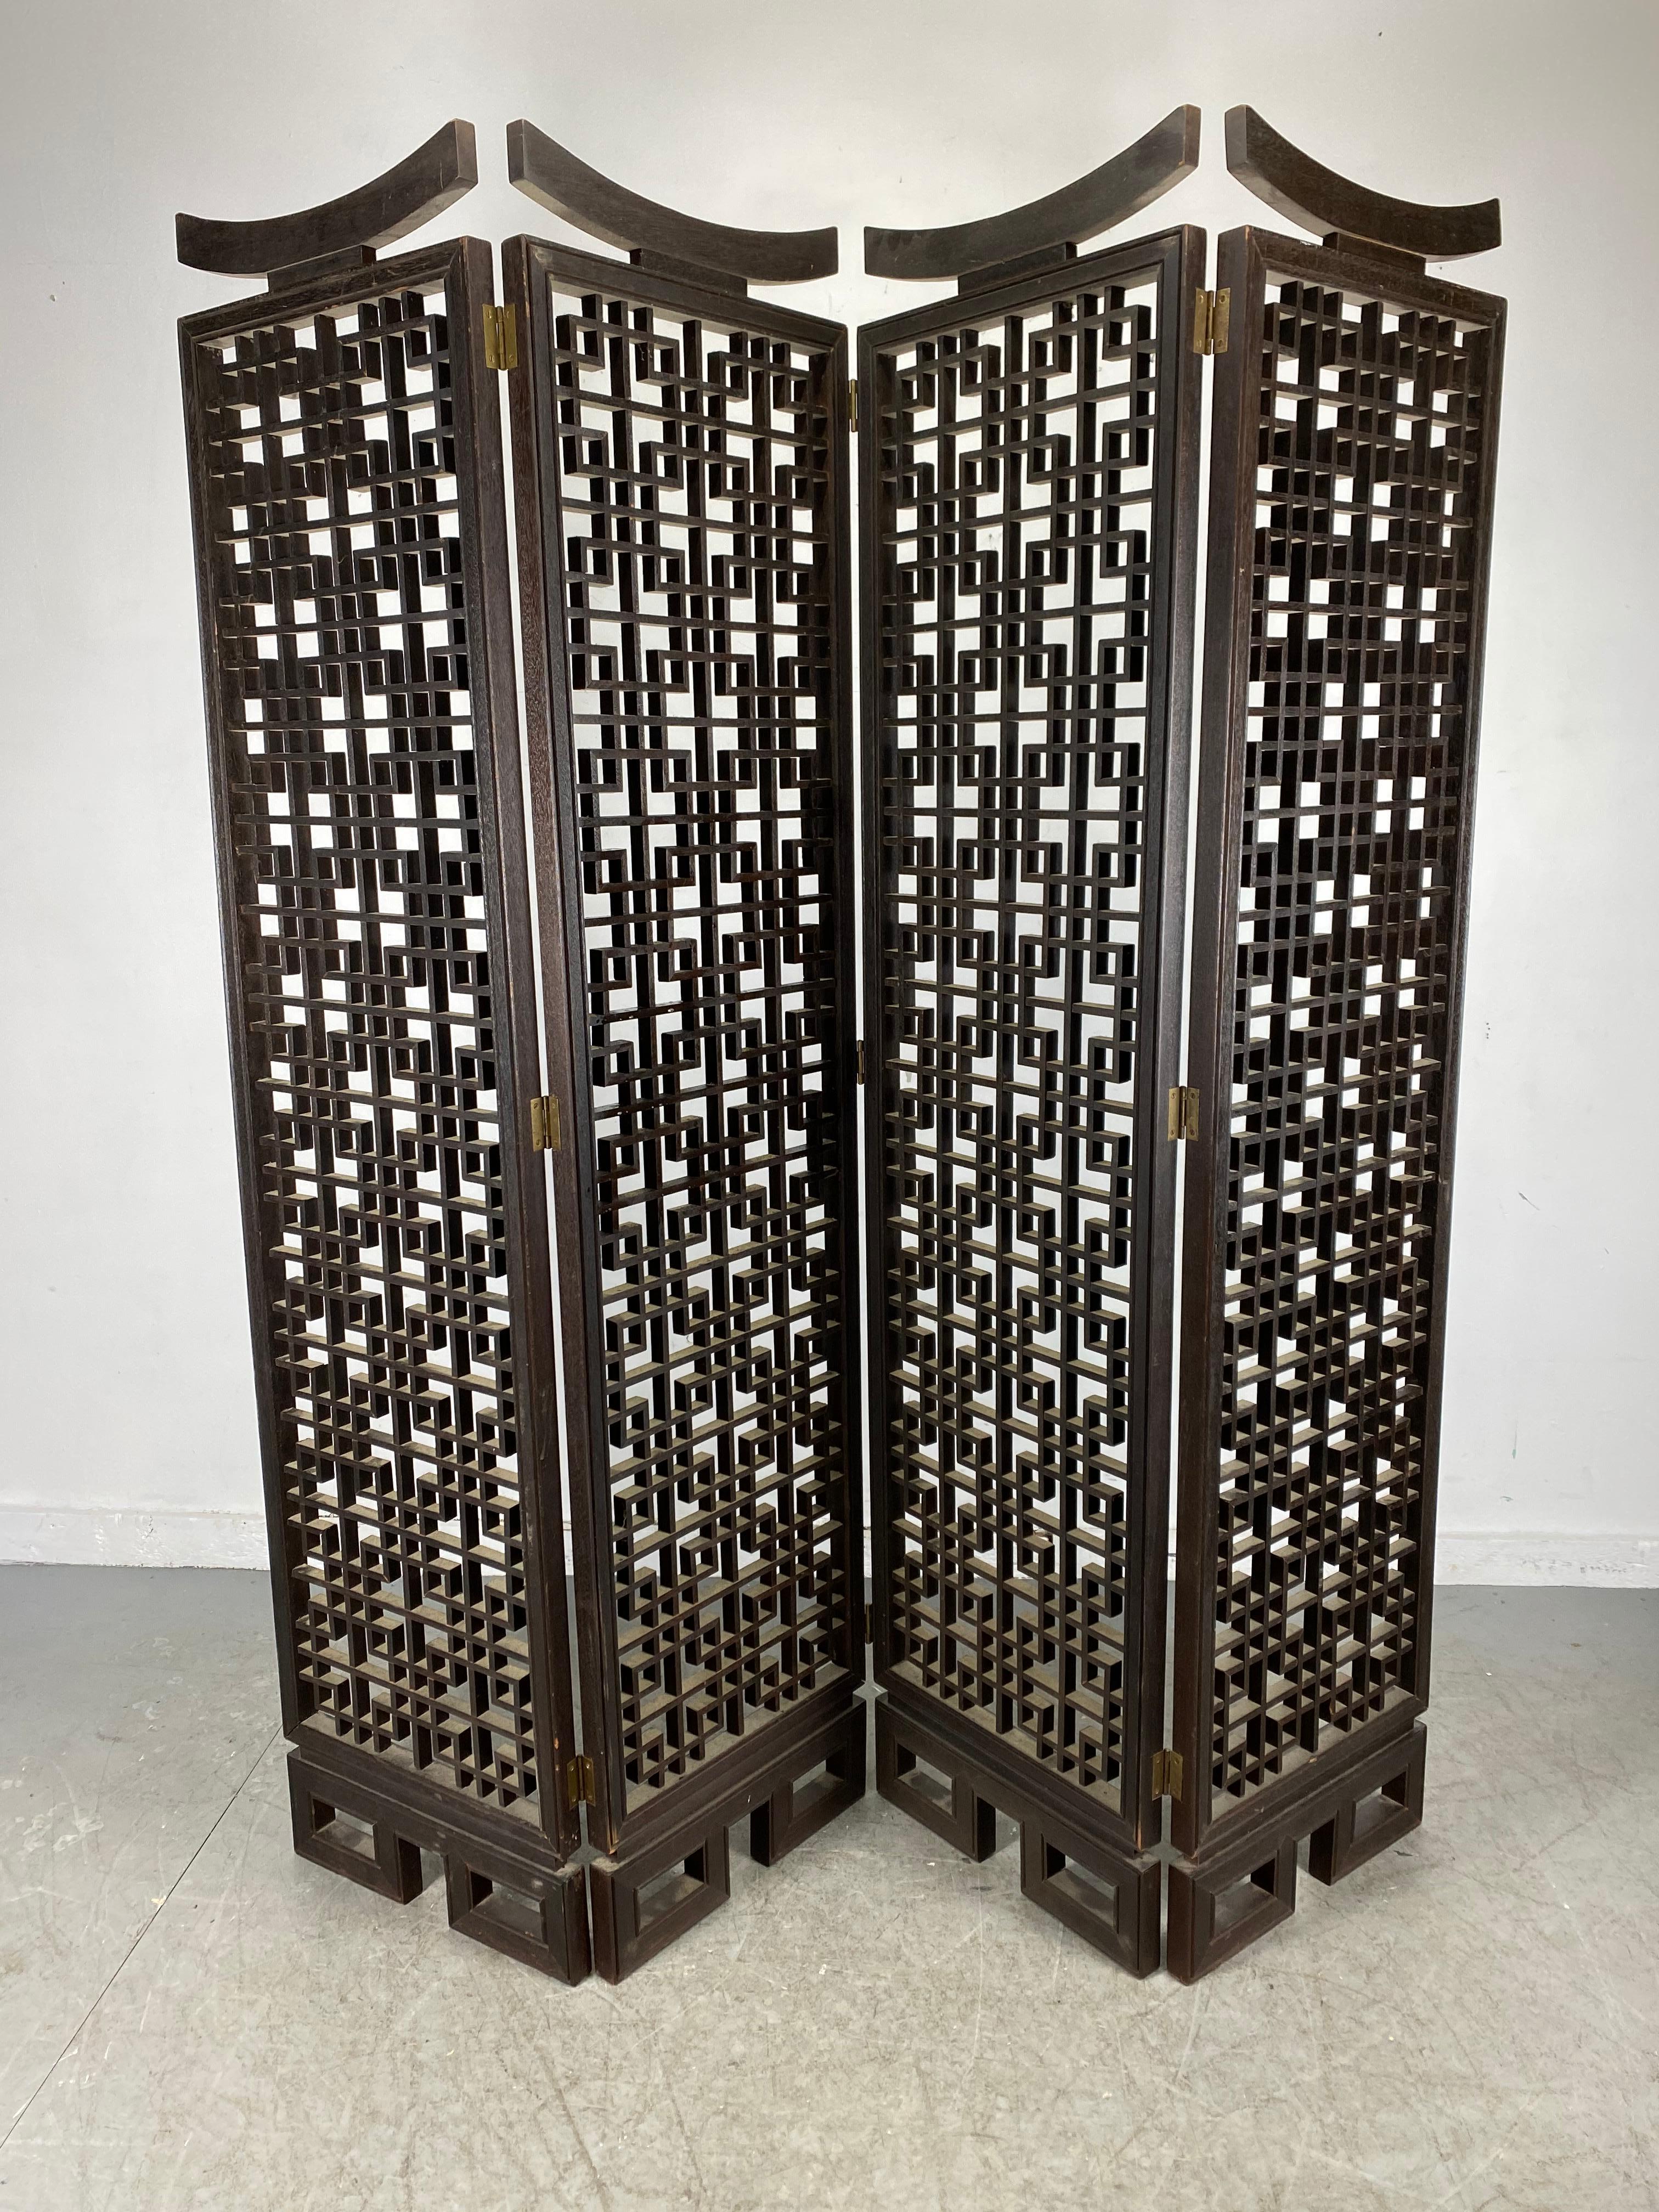 Unusual 4-panel traditional Meji, Japanese Shoji screen / room divider, beautifully crafted, stunning design! Architectural, four hinged panels, each panel measures 17